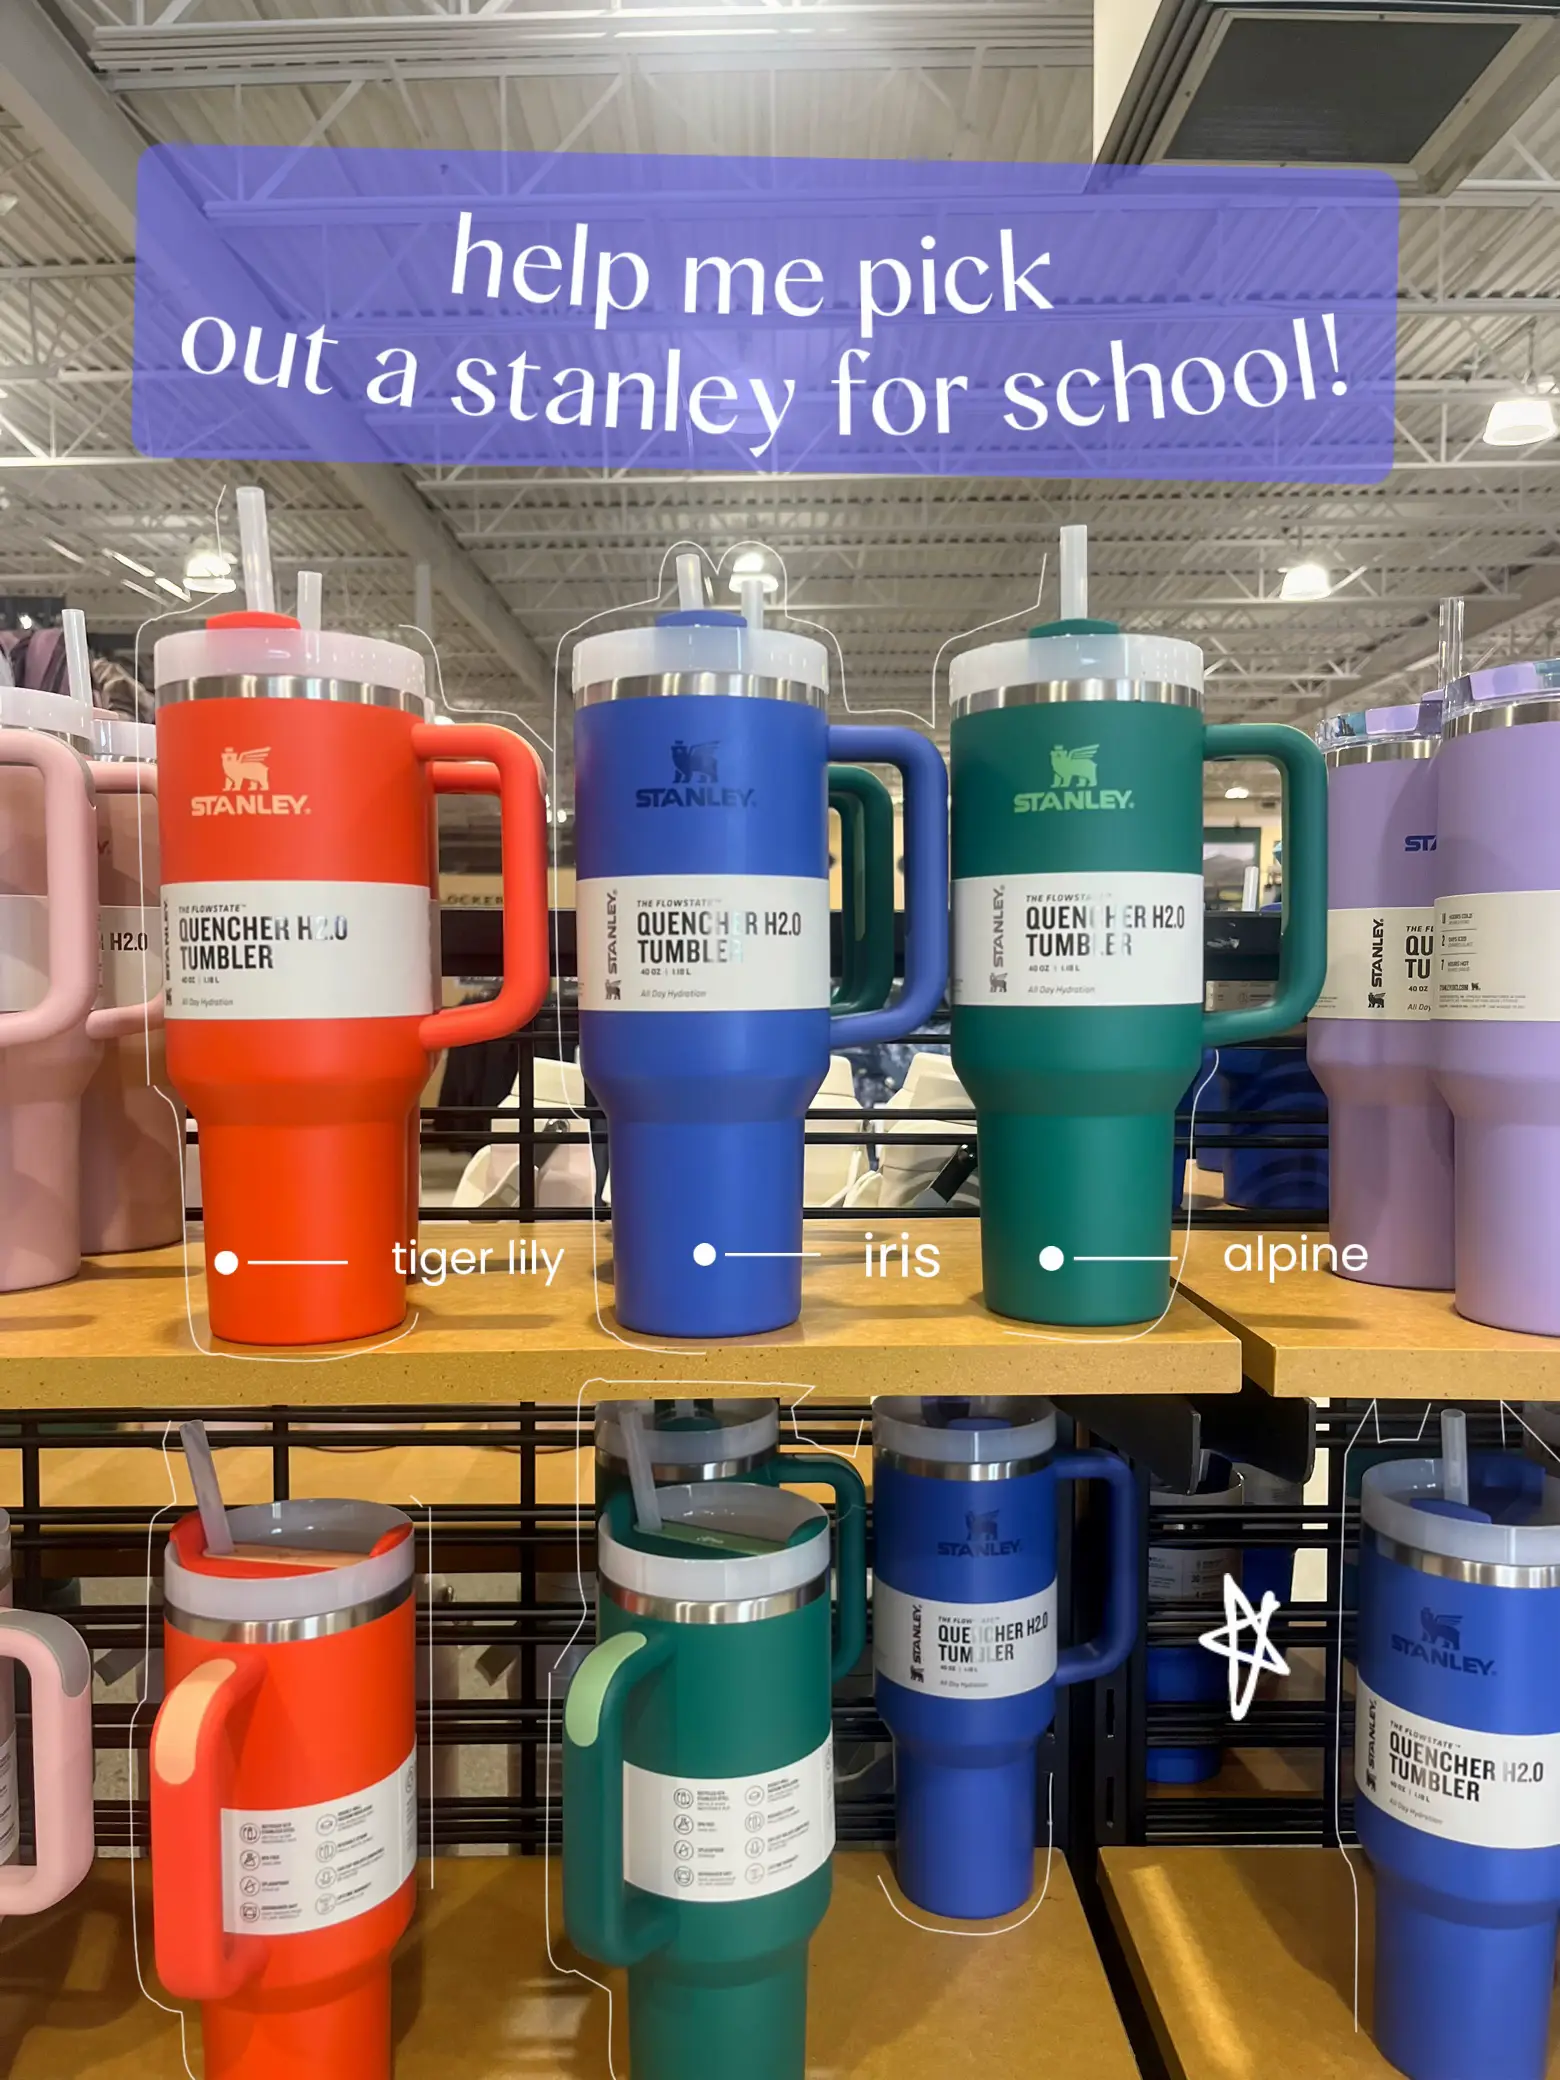 help me pick out a stanley! 🍁🌊🌲, Gallery posted by lily ⛵️